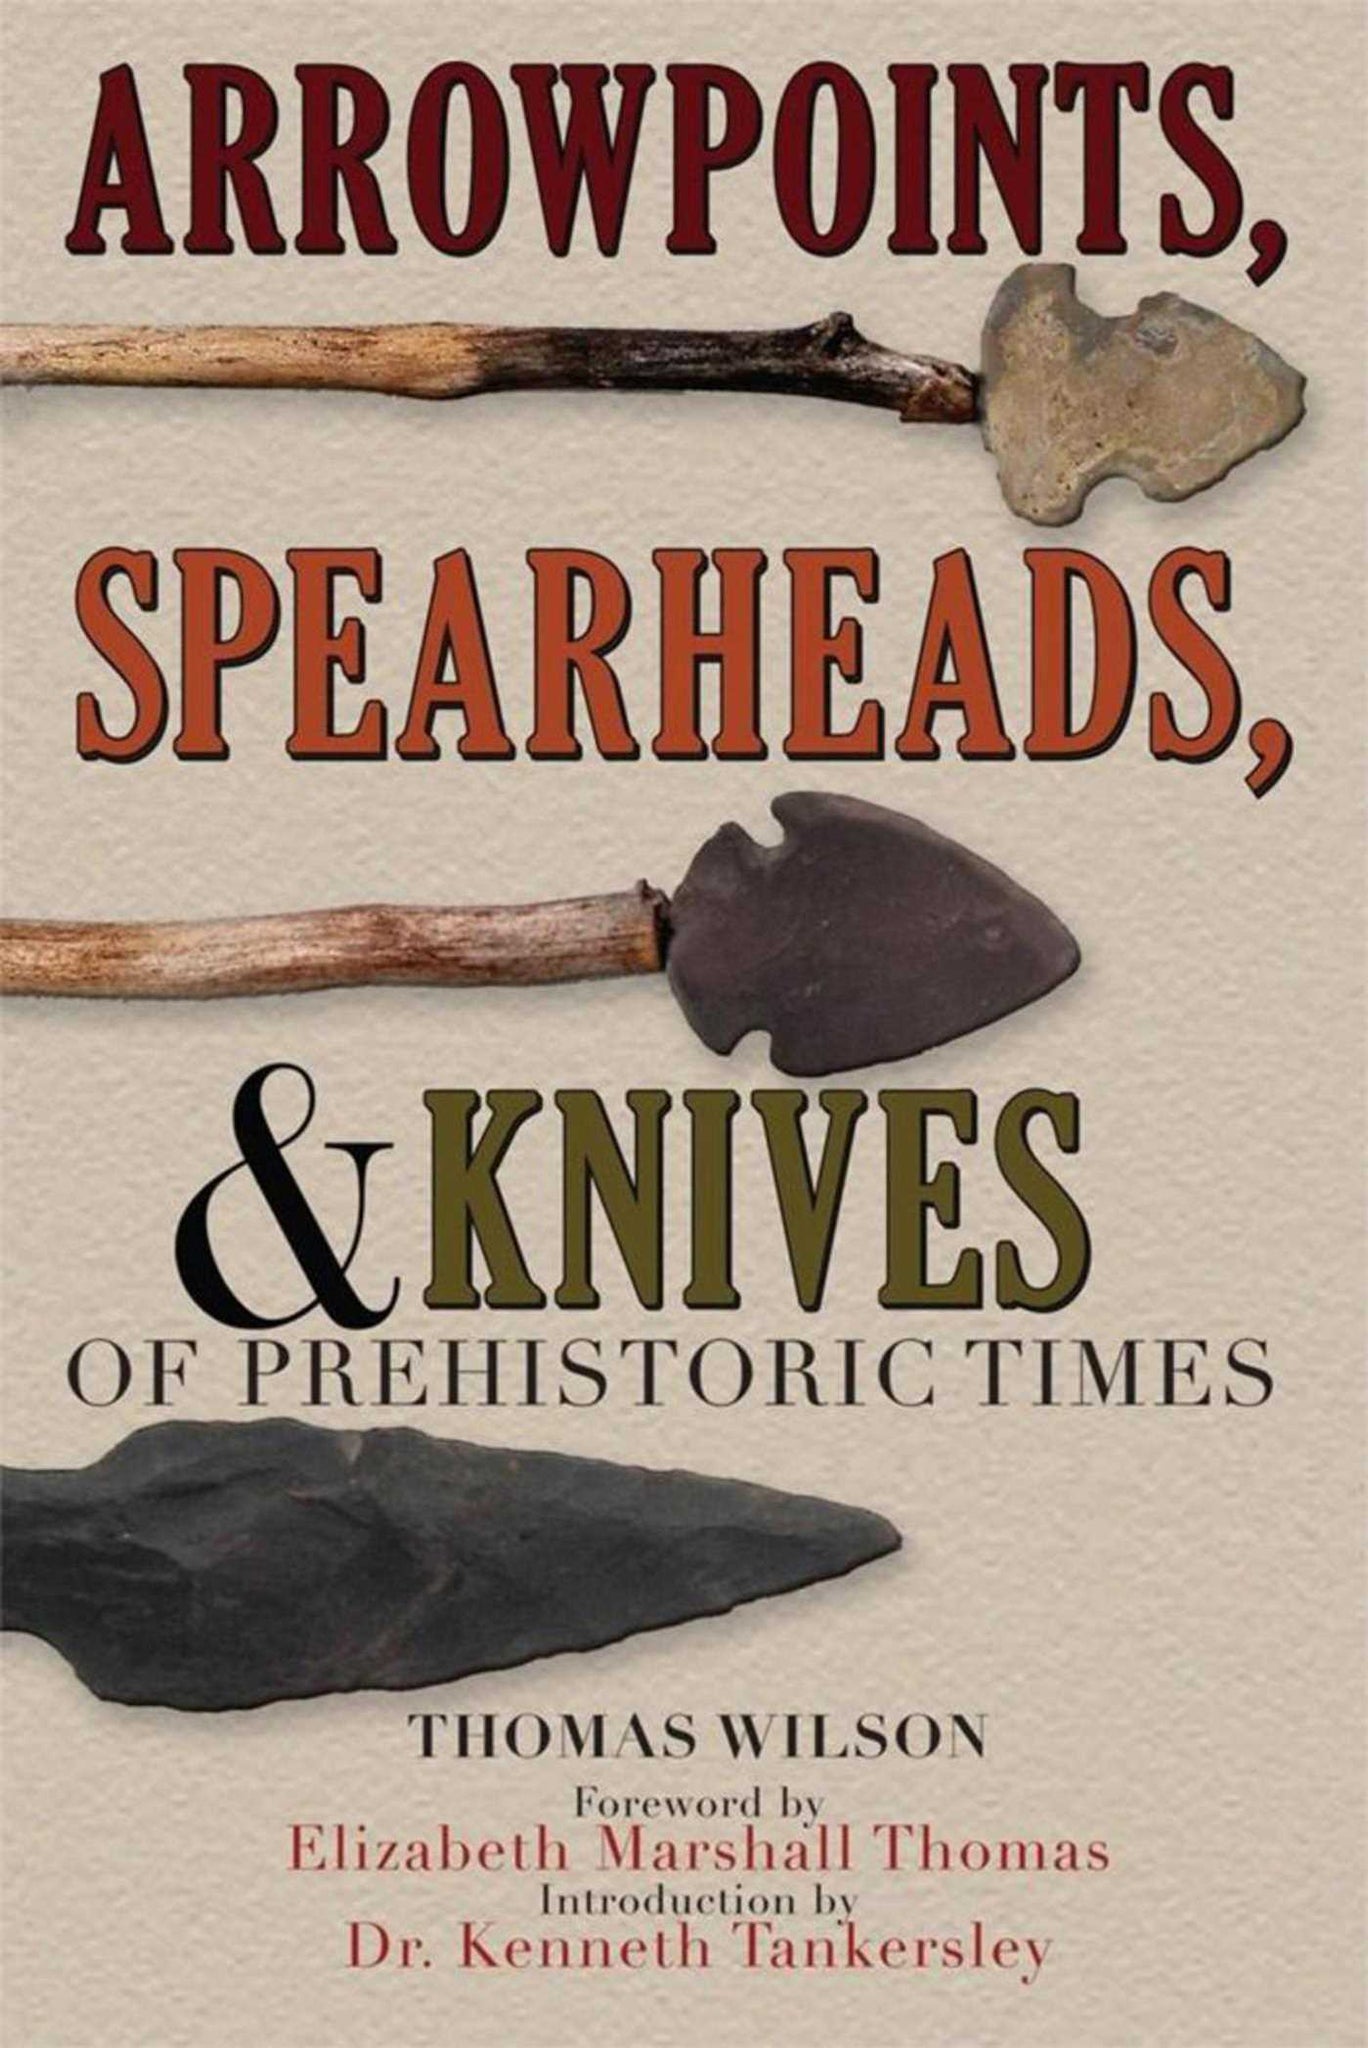 Arrowpoints, Spearheads, and Knives of Prehistoric Times